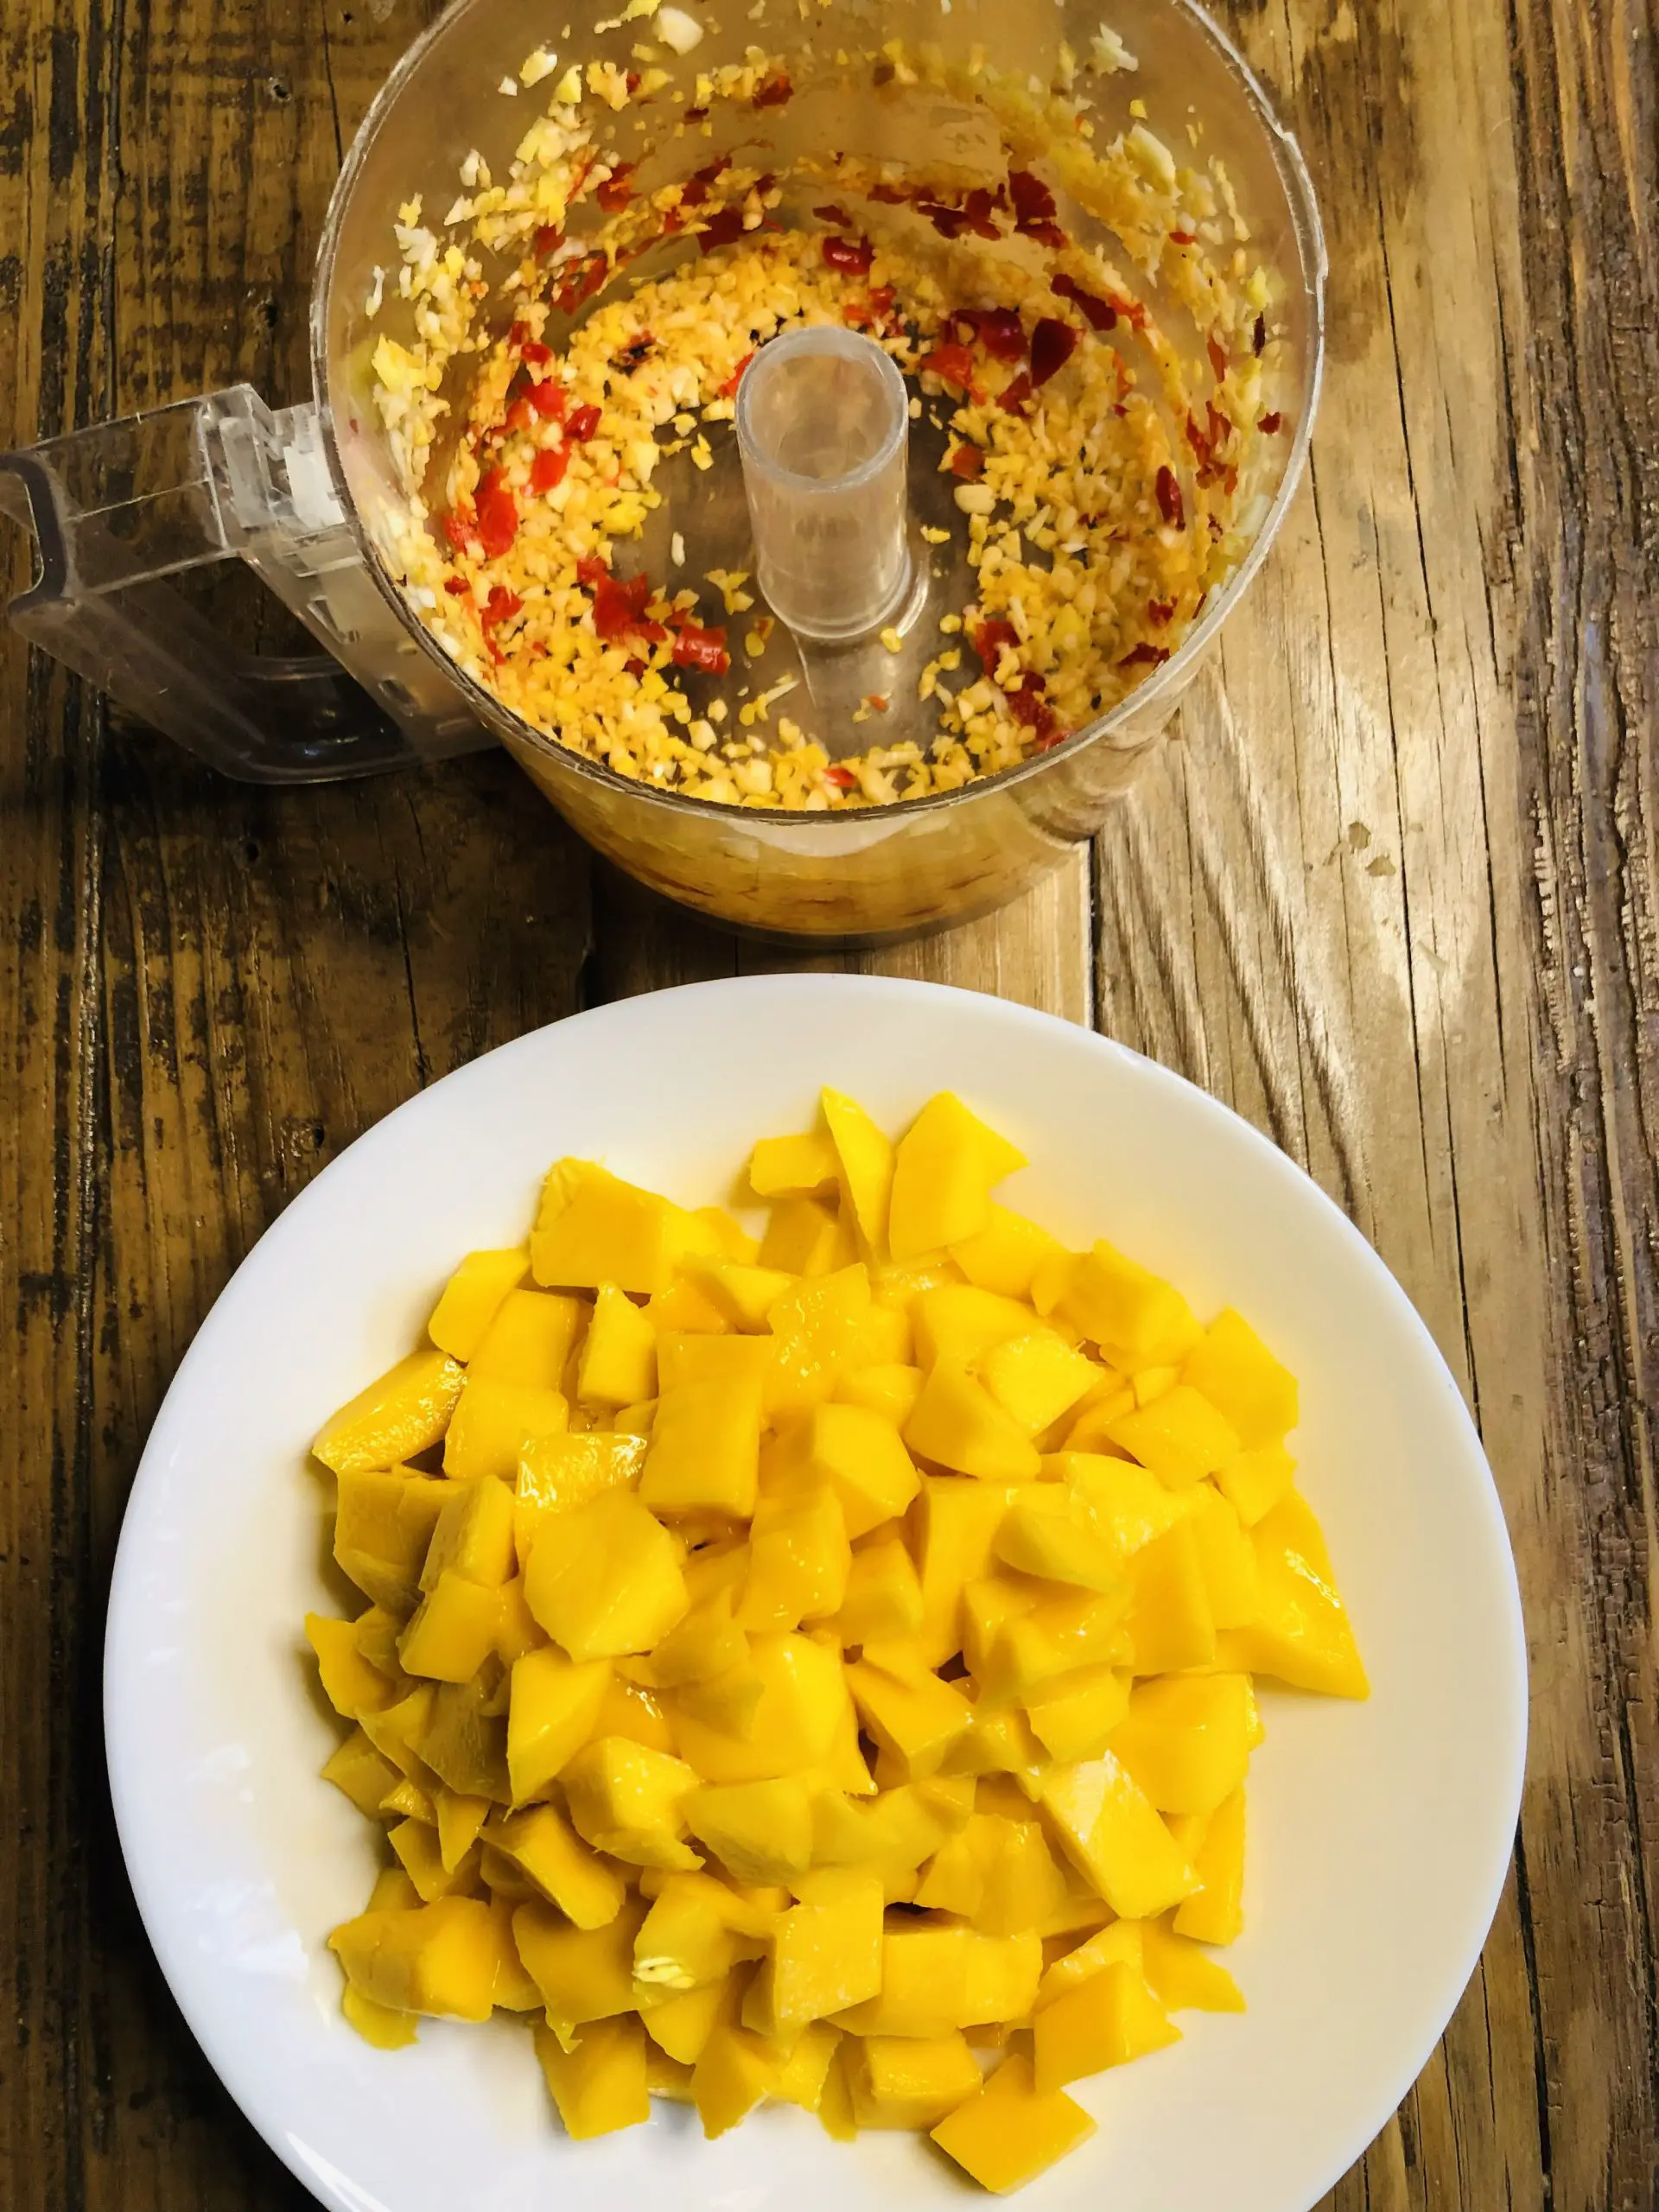 Pieces of cut up mango in a white bowl, minced chilies, and garlic in a food processor.